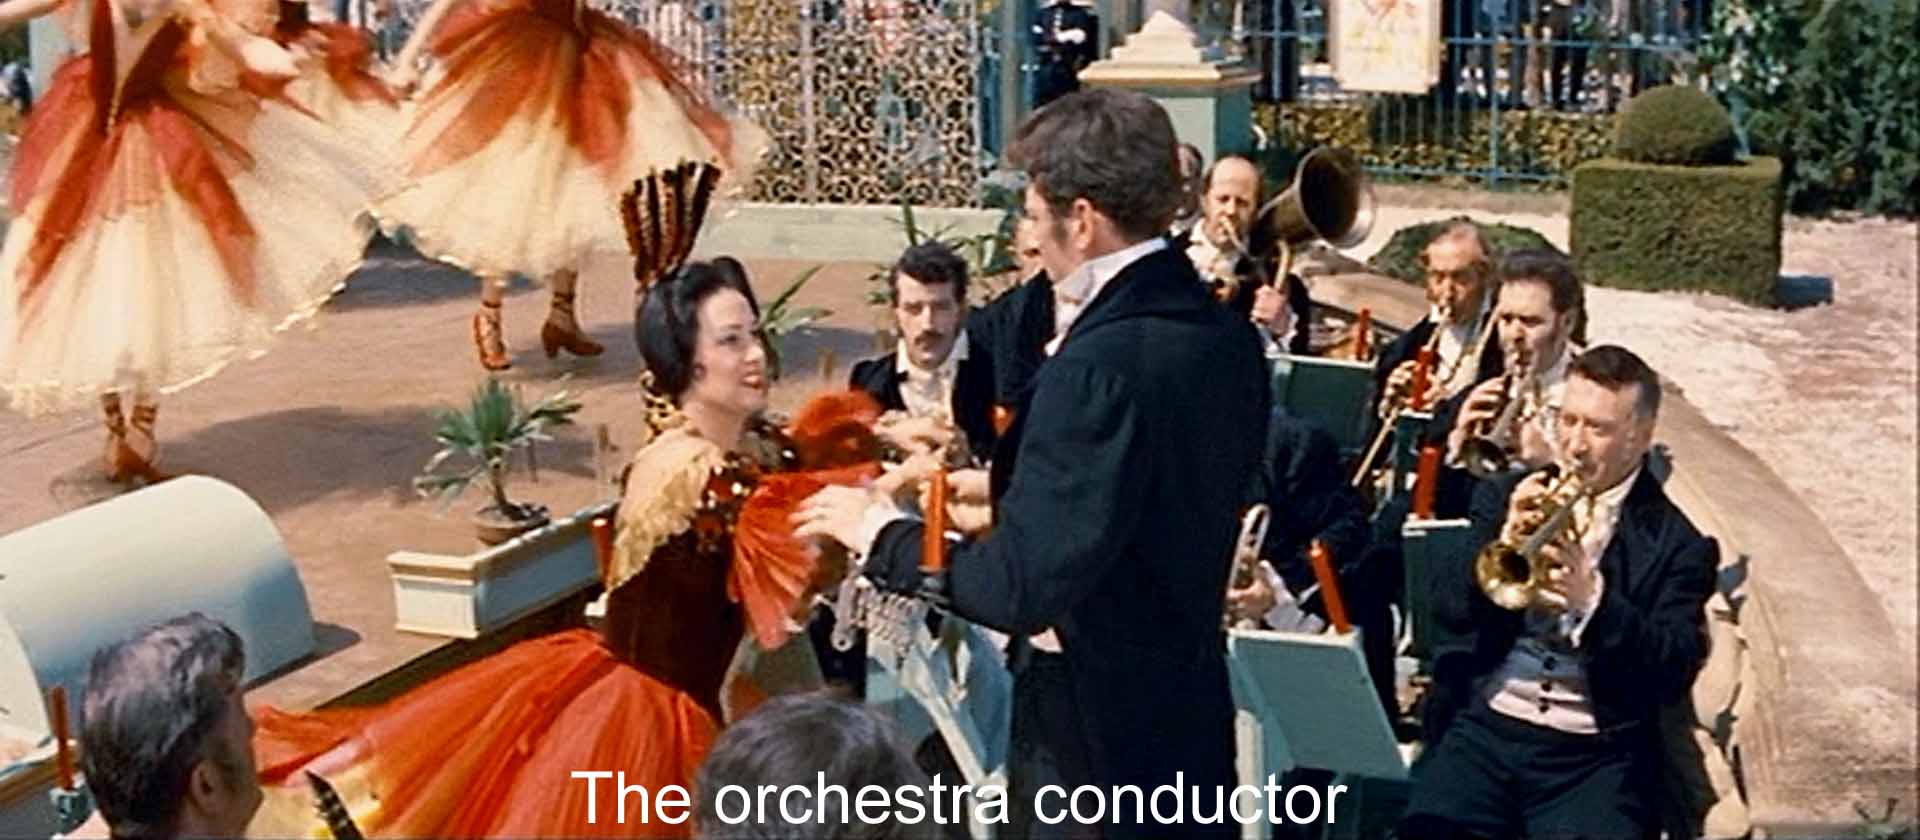 The orchestra conductor